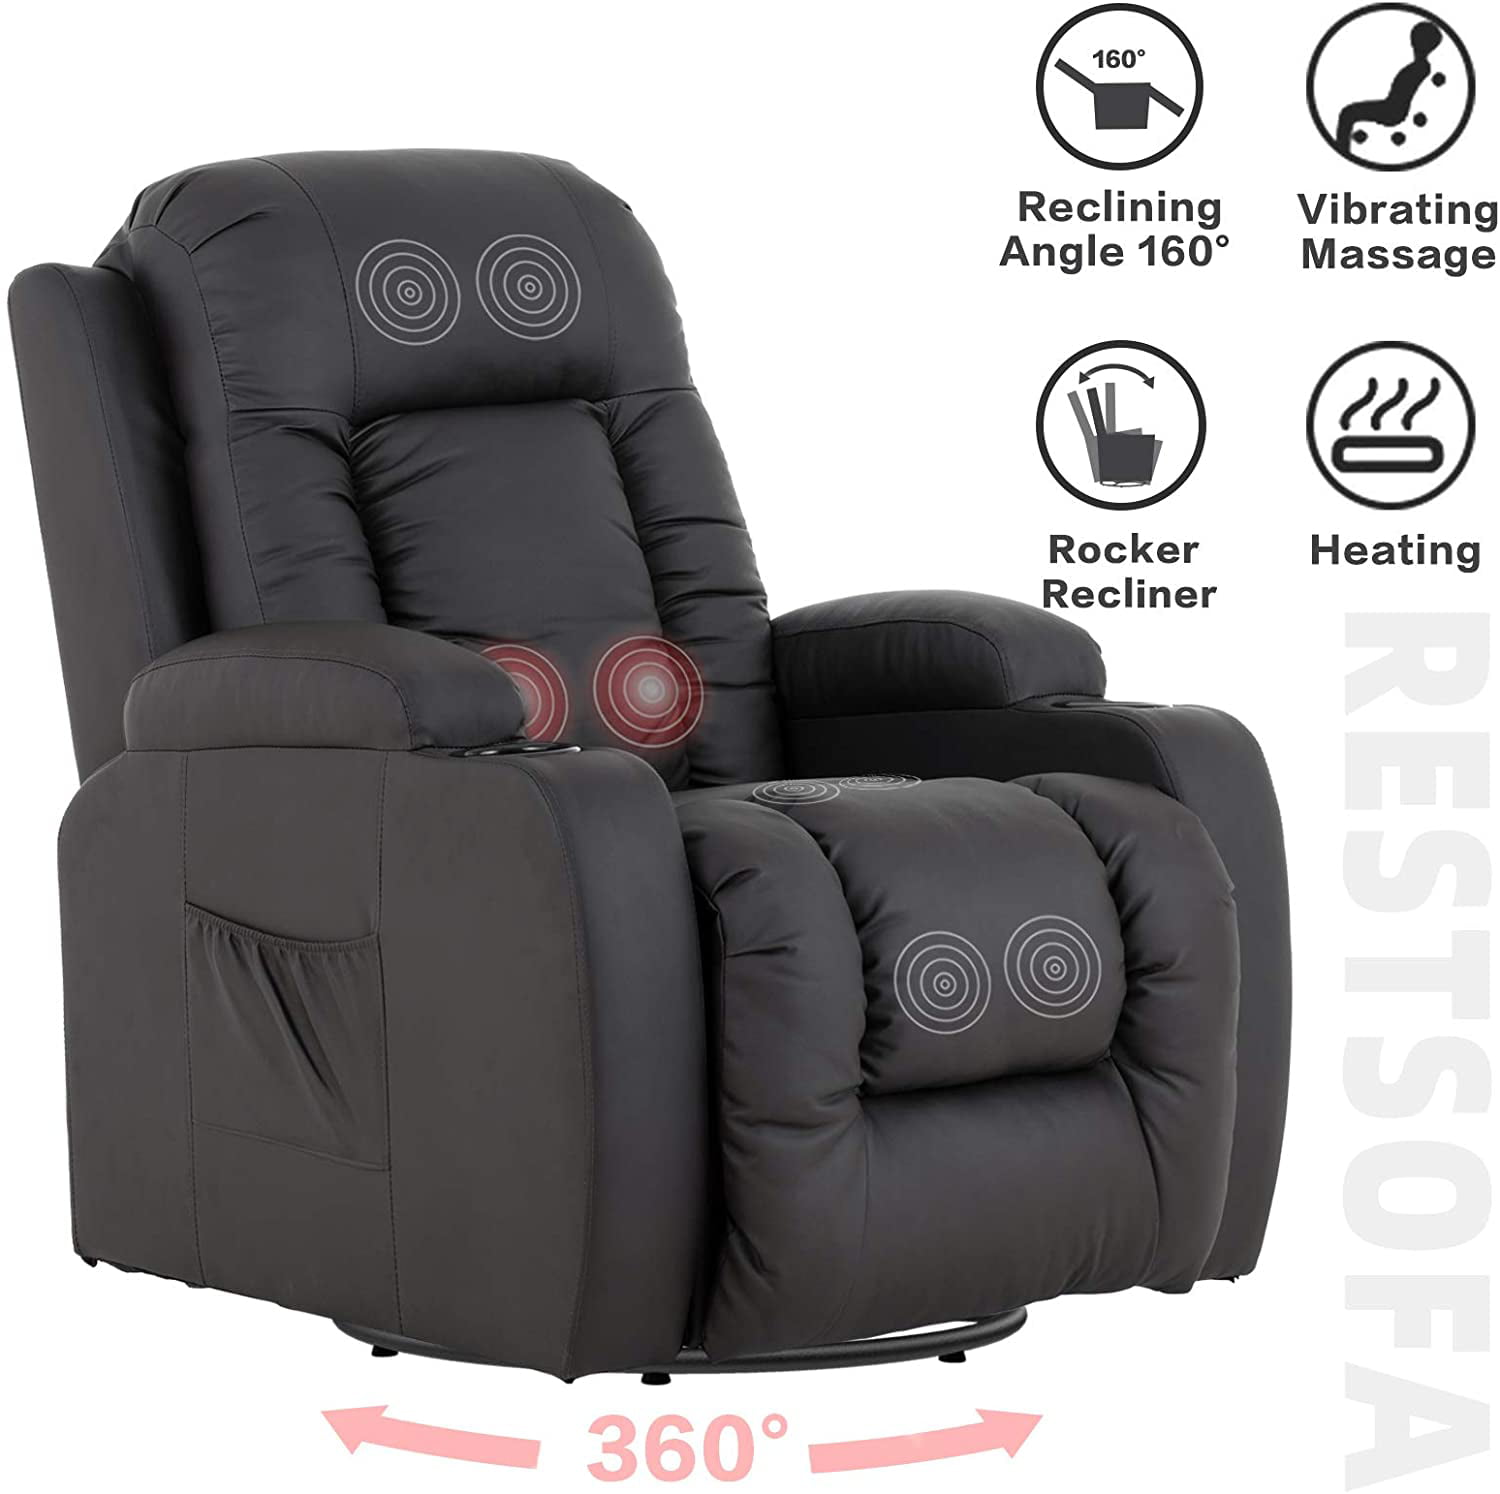 Mecor Massage Recliner Chair Pu Leather, Black Leather Rocking Recliner Chair